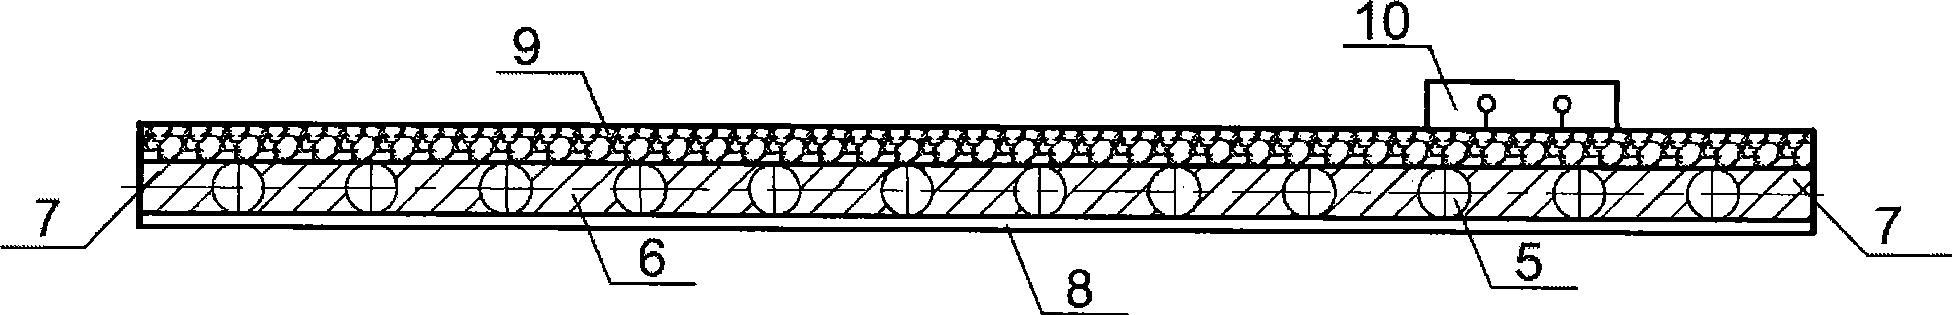 Closed-loop capillary solar photovoltaic thermoelectric plate